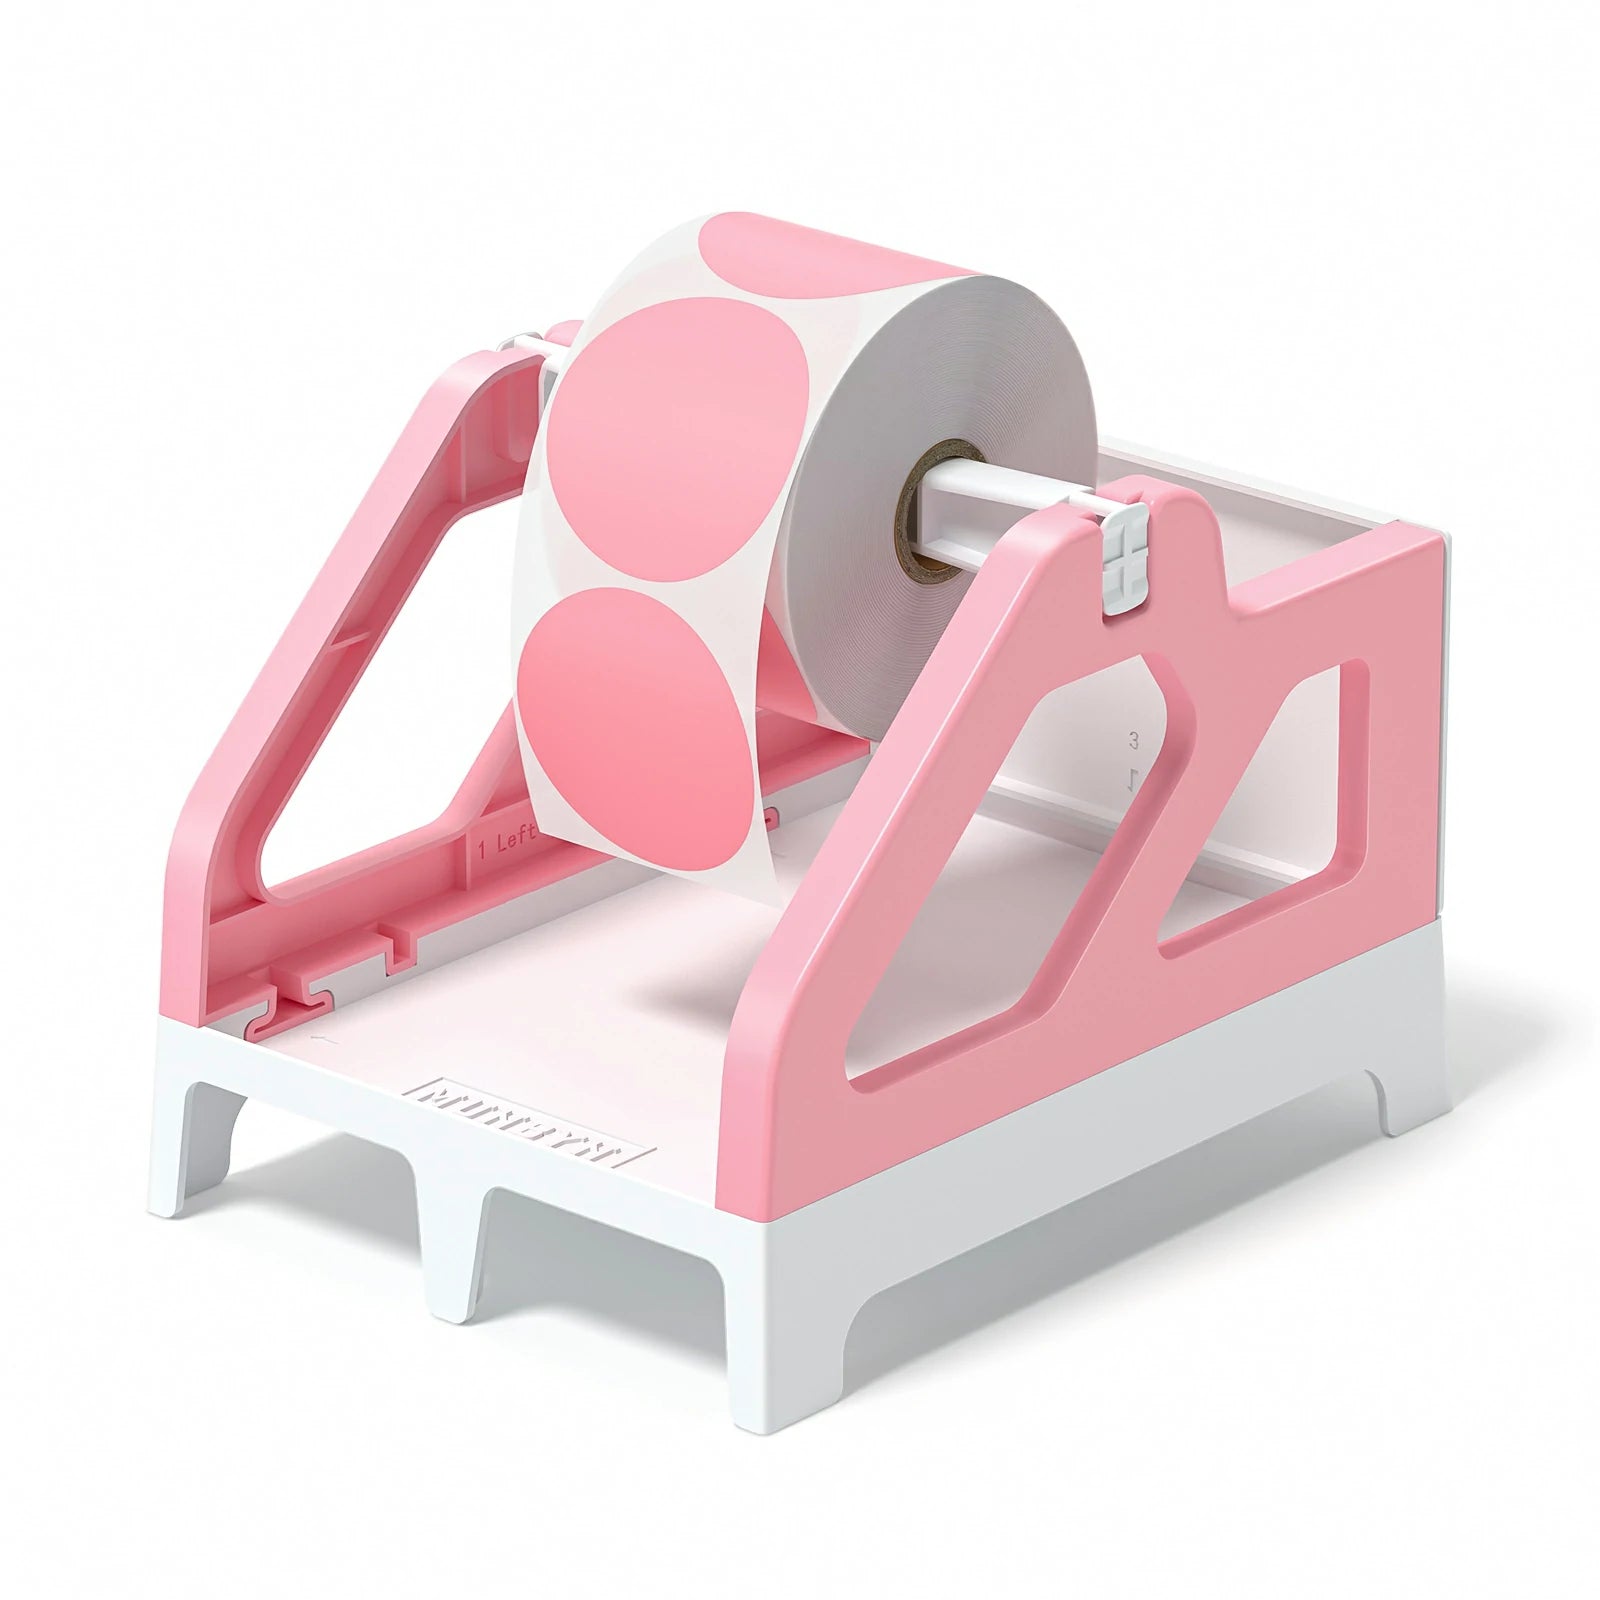 MUNBYN pink label holder is easy to assemble